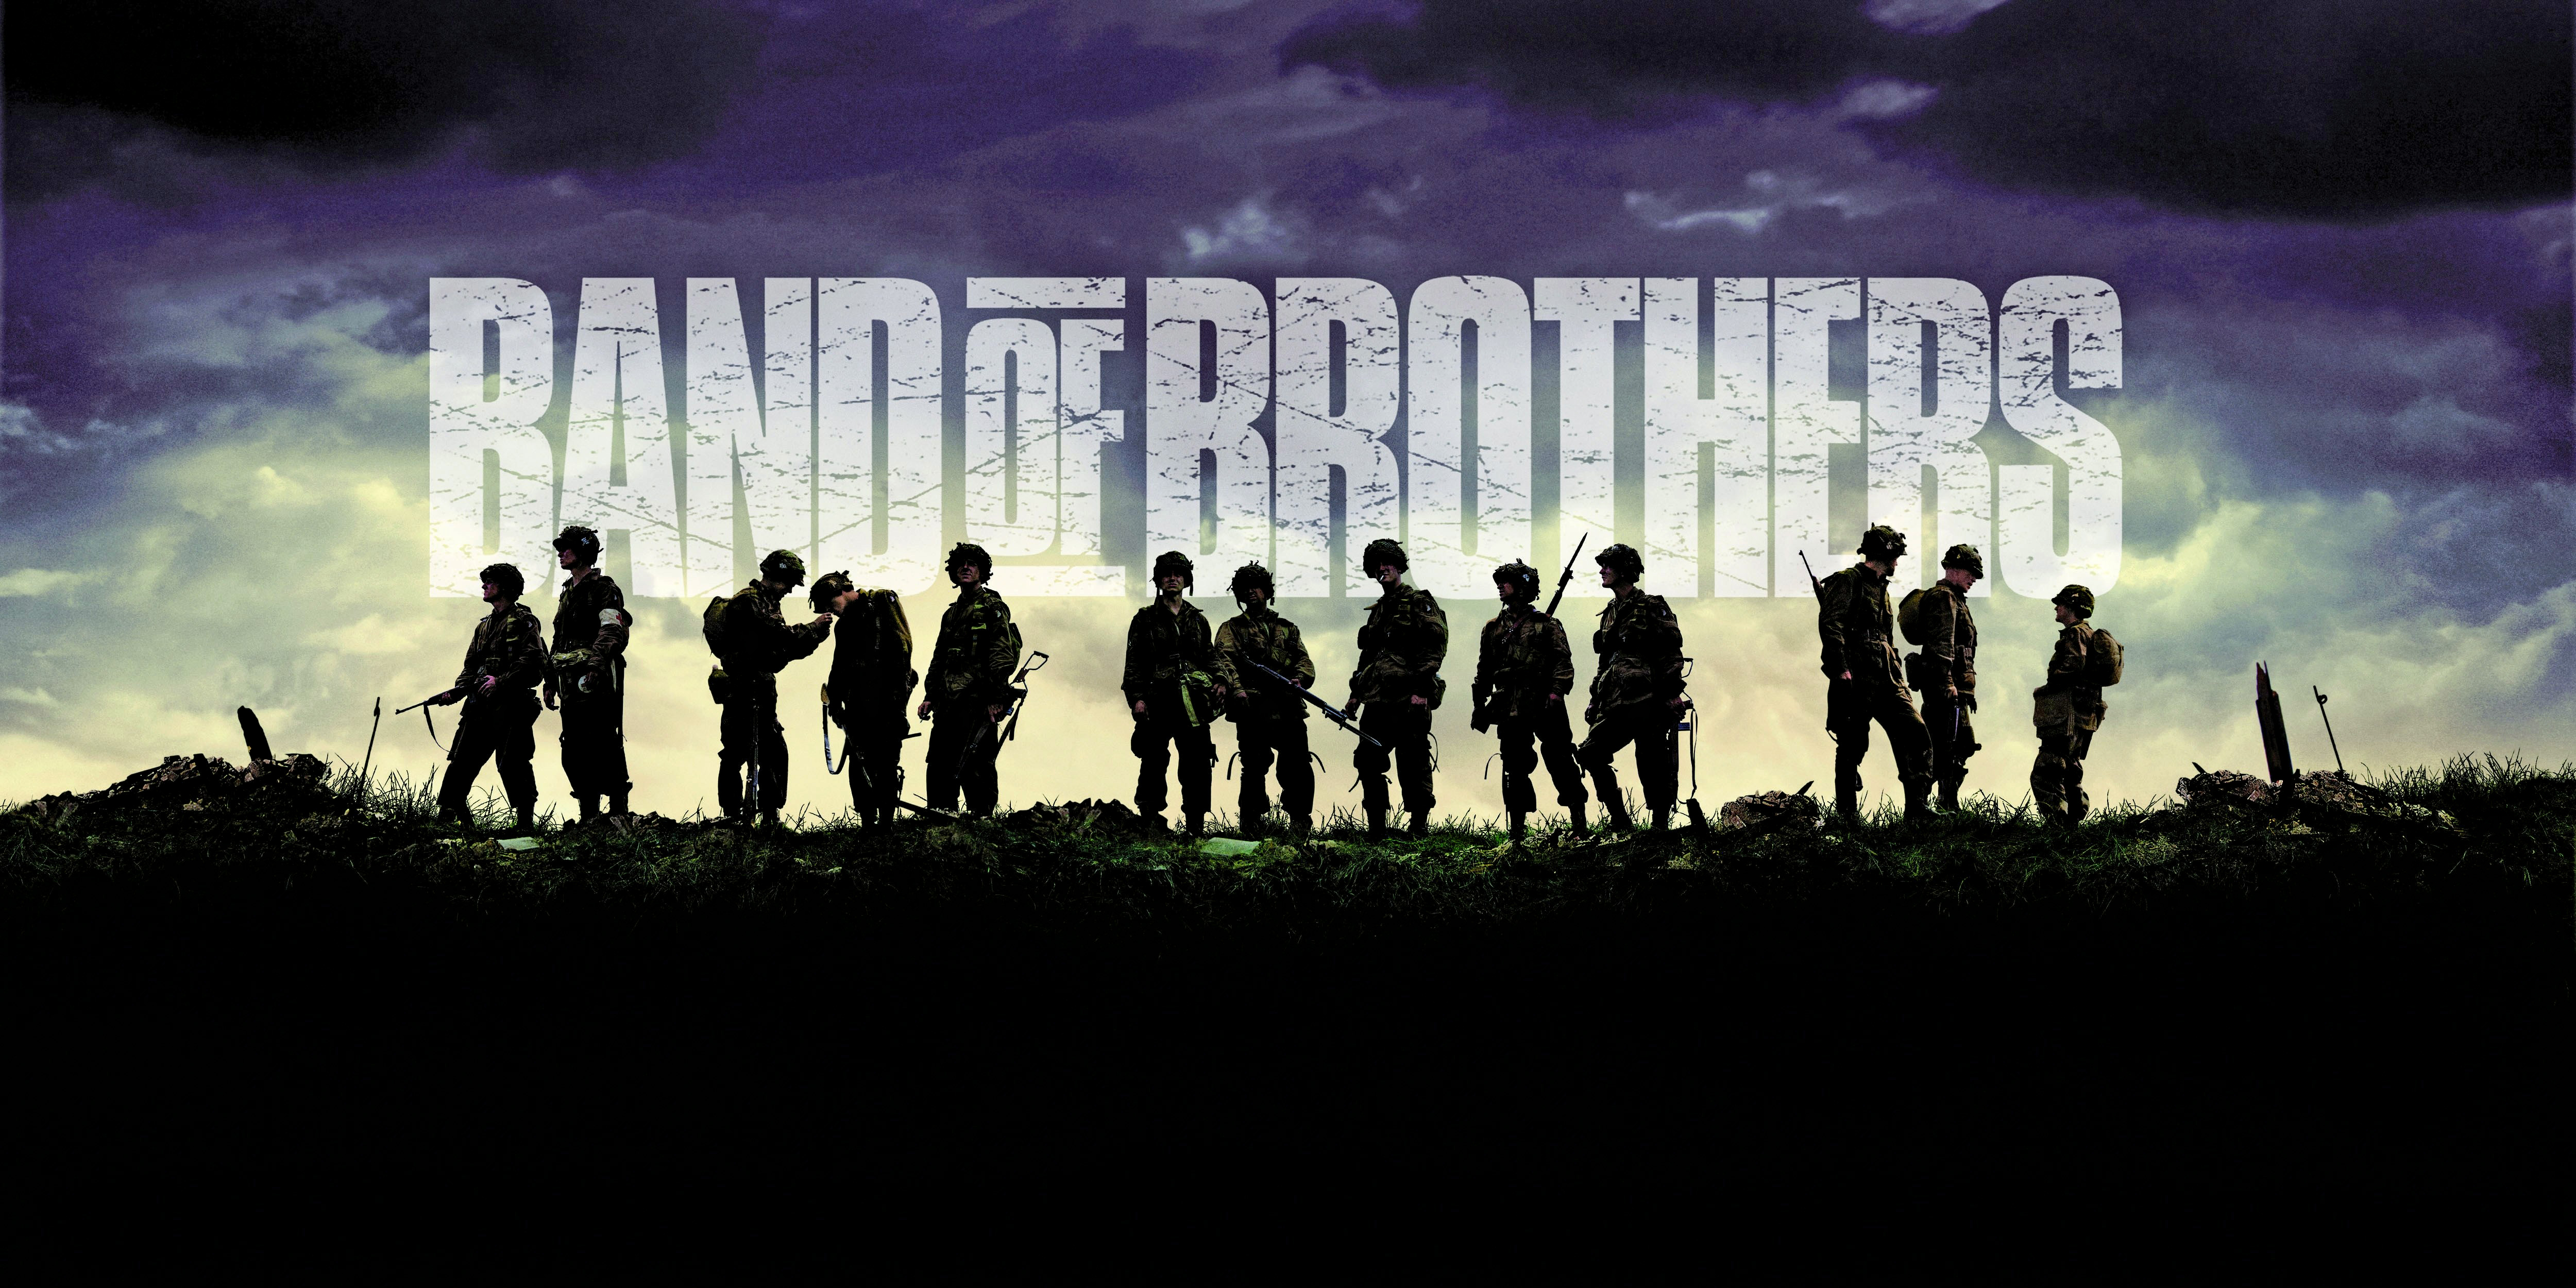 band of brothers, War, Military, Action, Drama, Hbo, Band, Brothers, Soldier, Poster Wallpaper